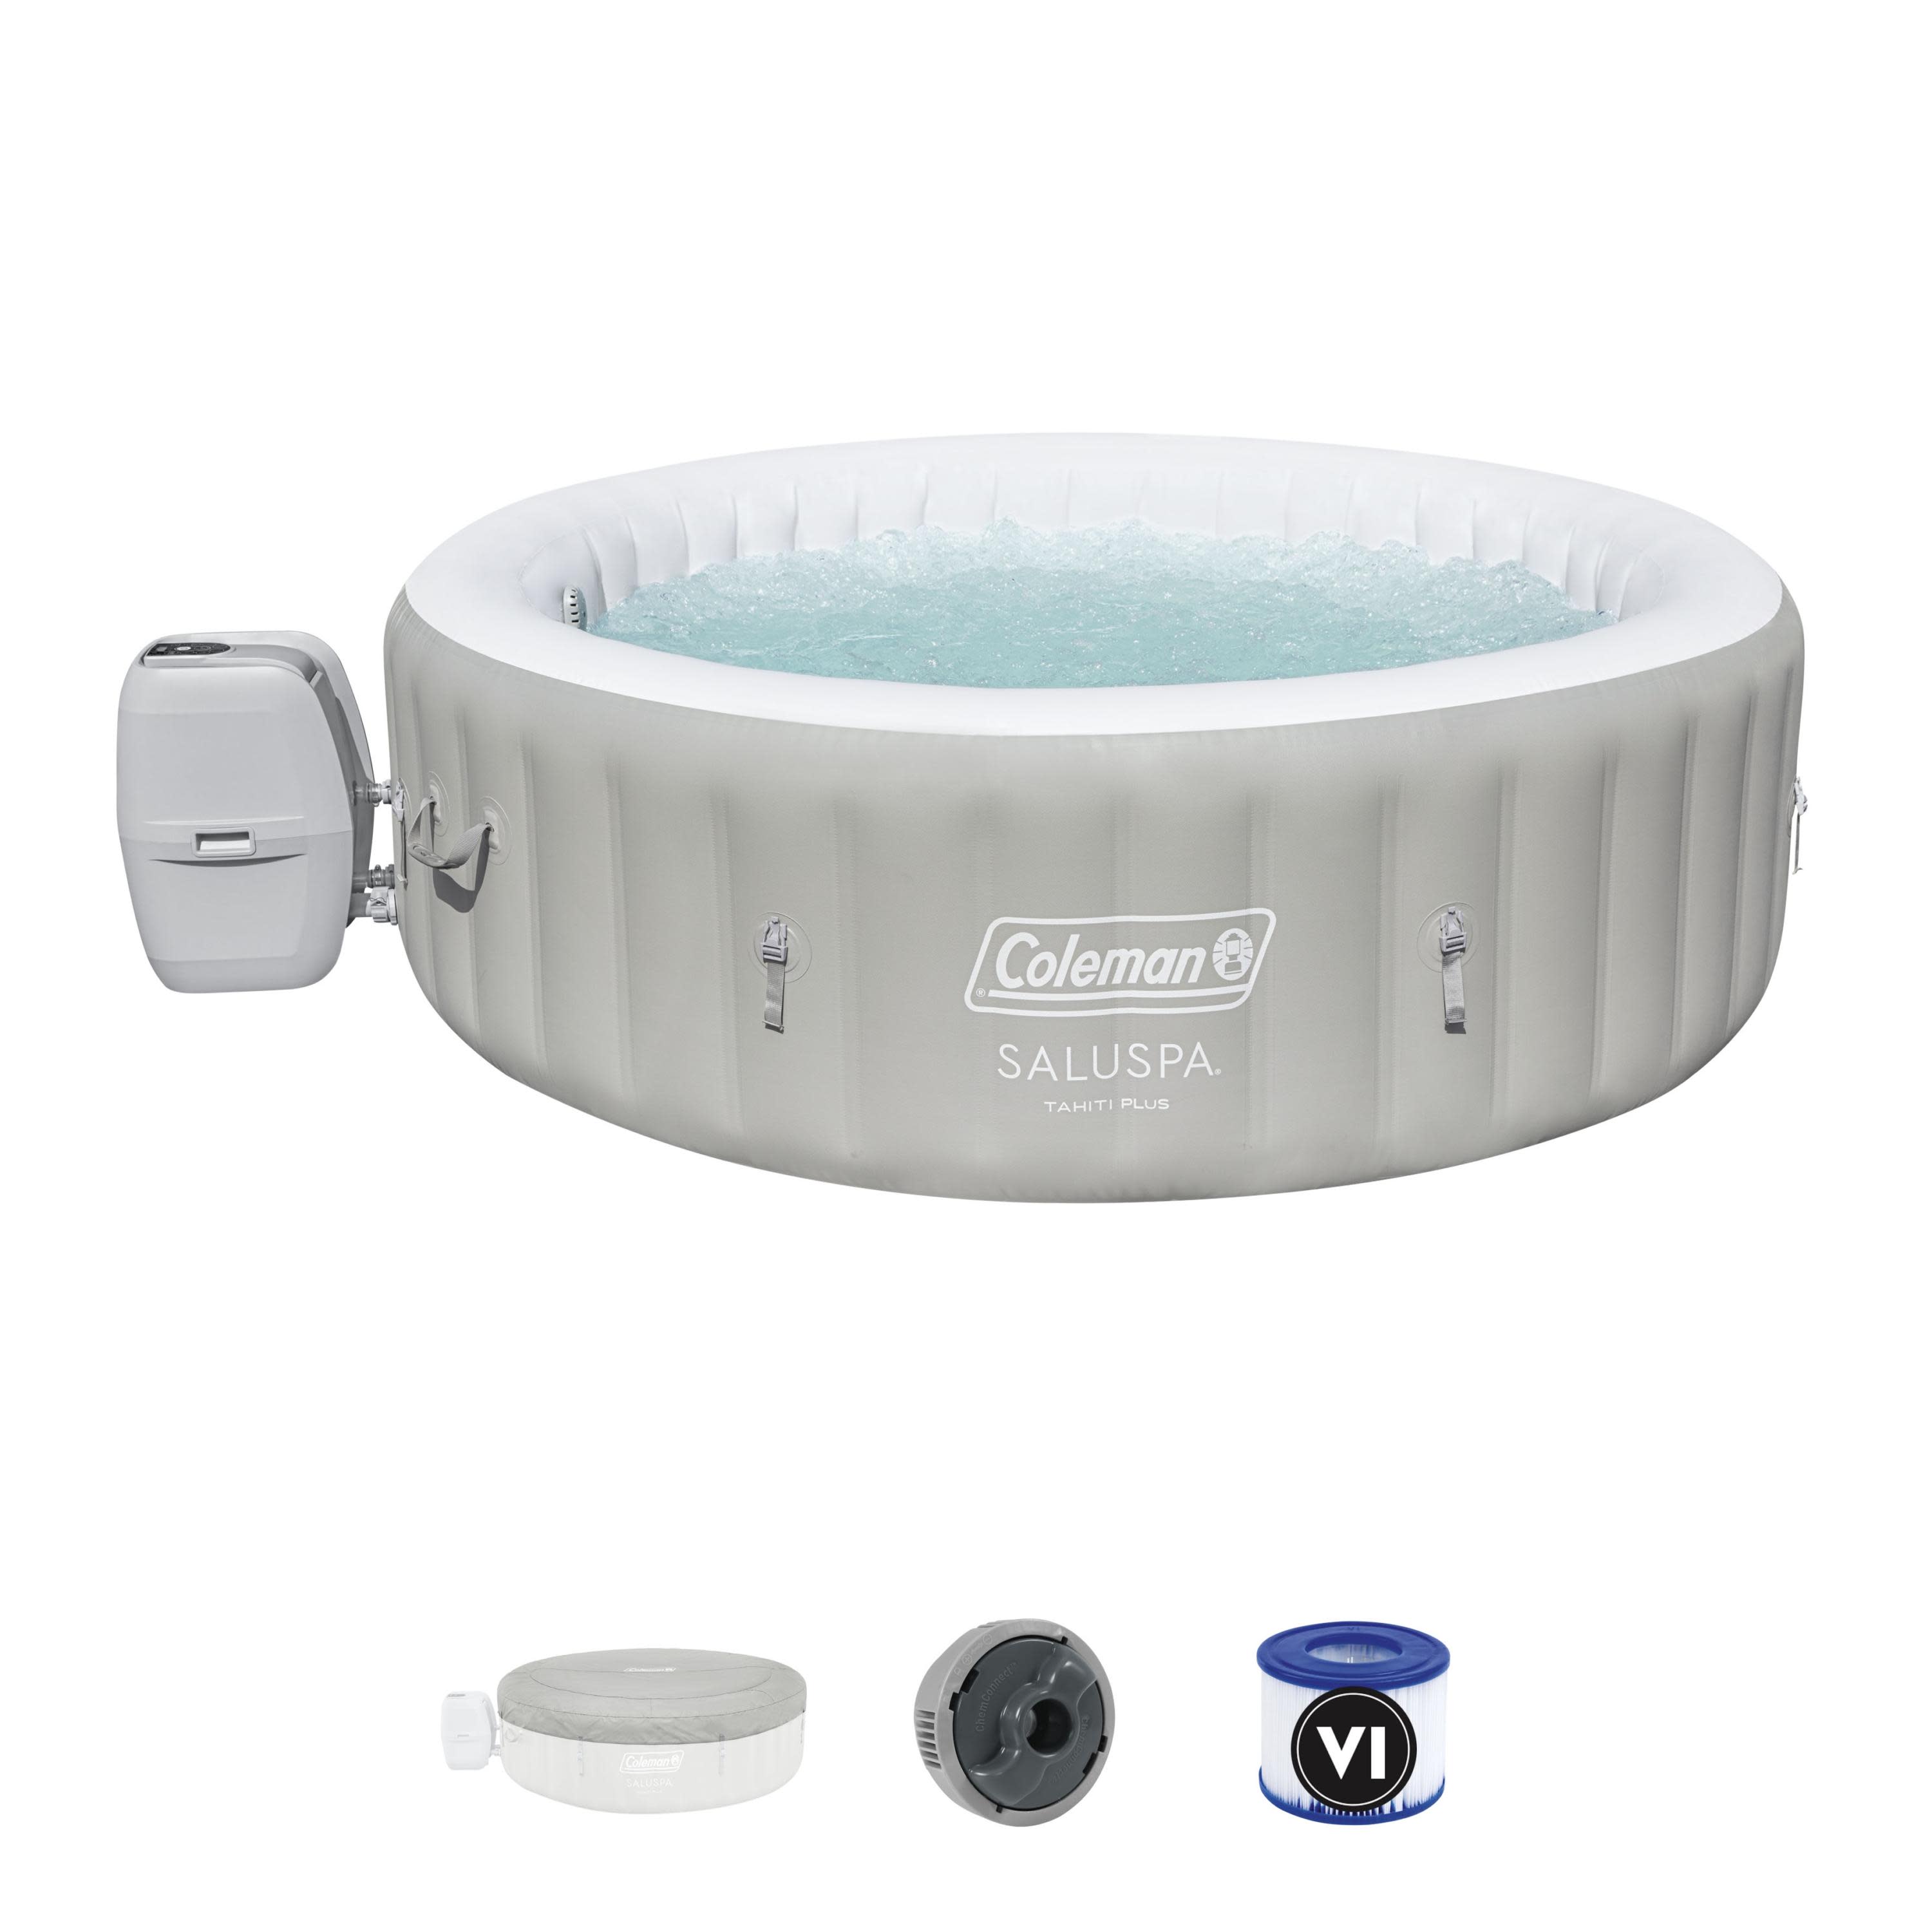 Coleman Tahiti Plus AirJet Inflatable Hot Tub Spa 5-7 person - image 3 of 9